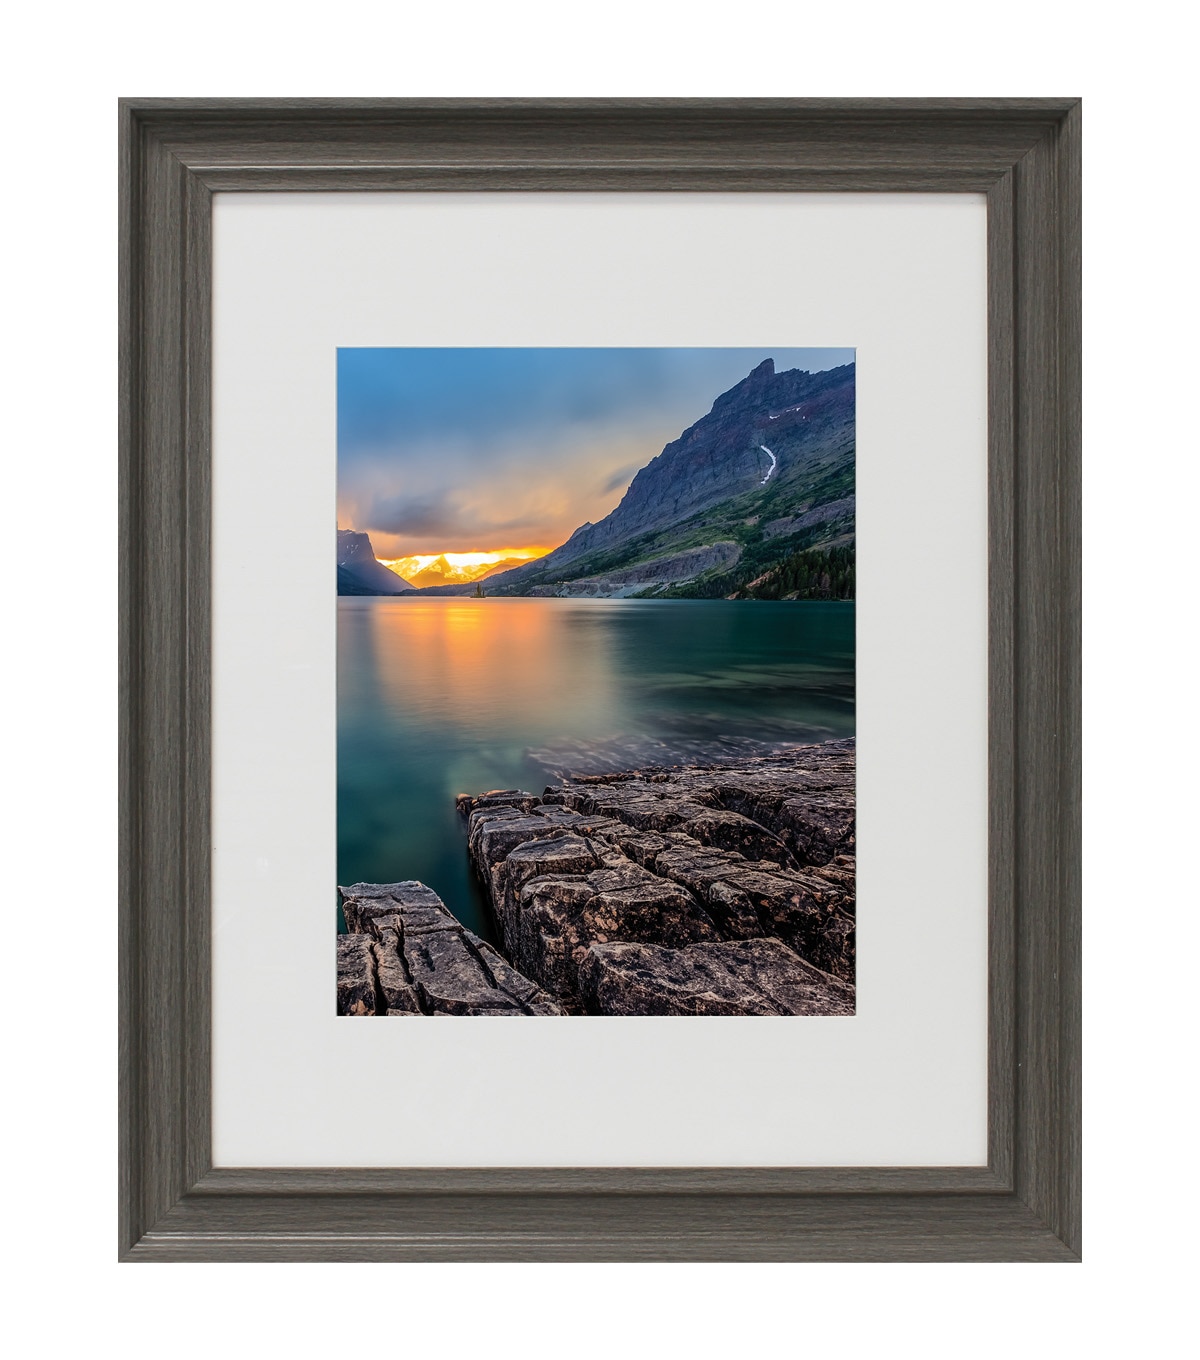 16x20 frame with mat size